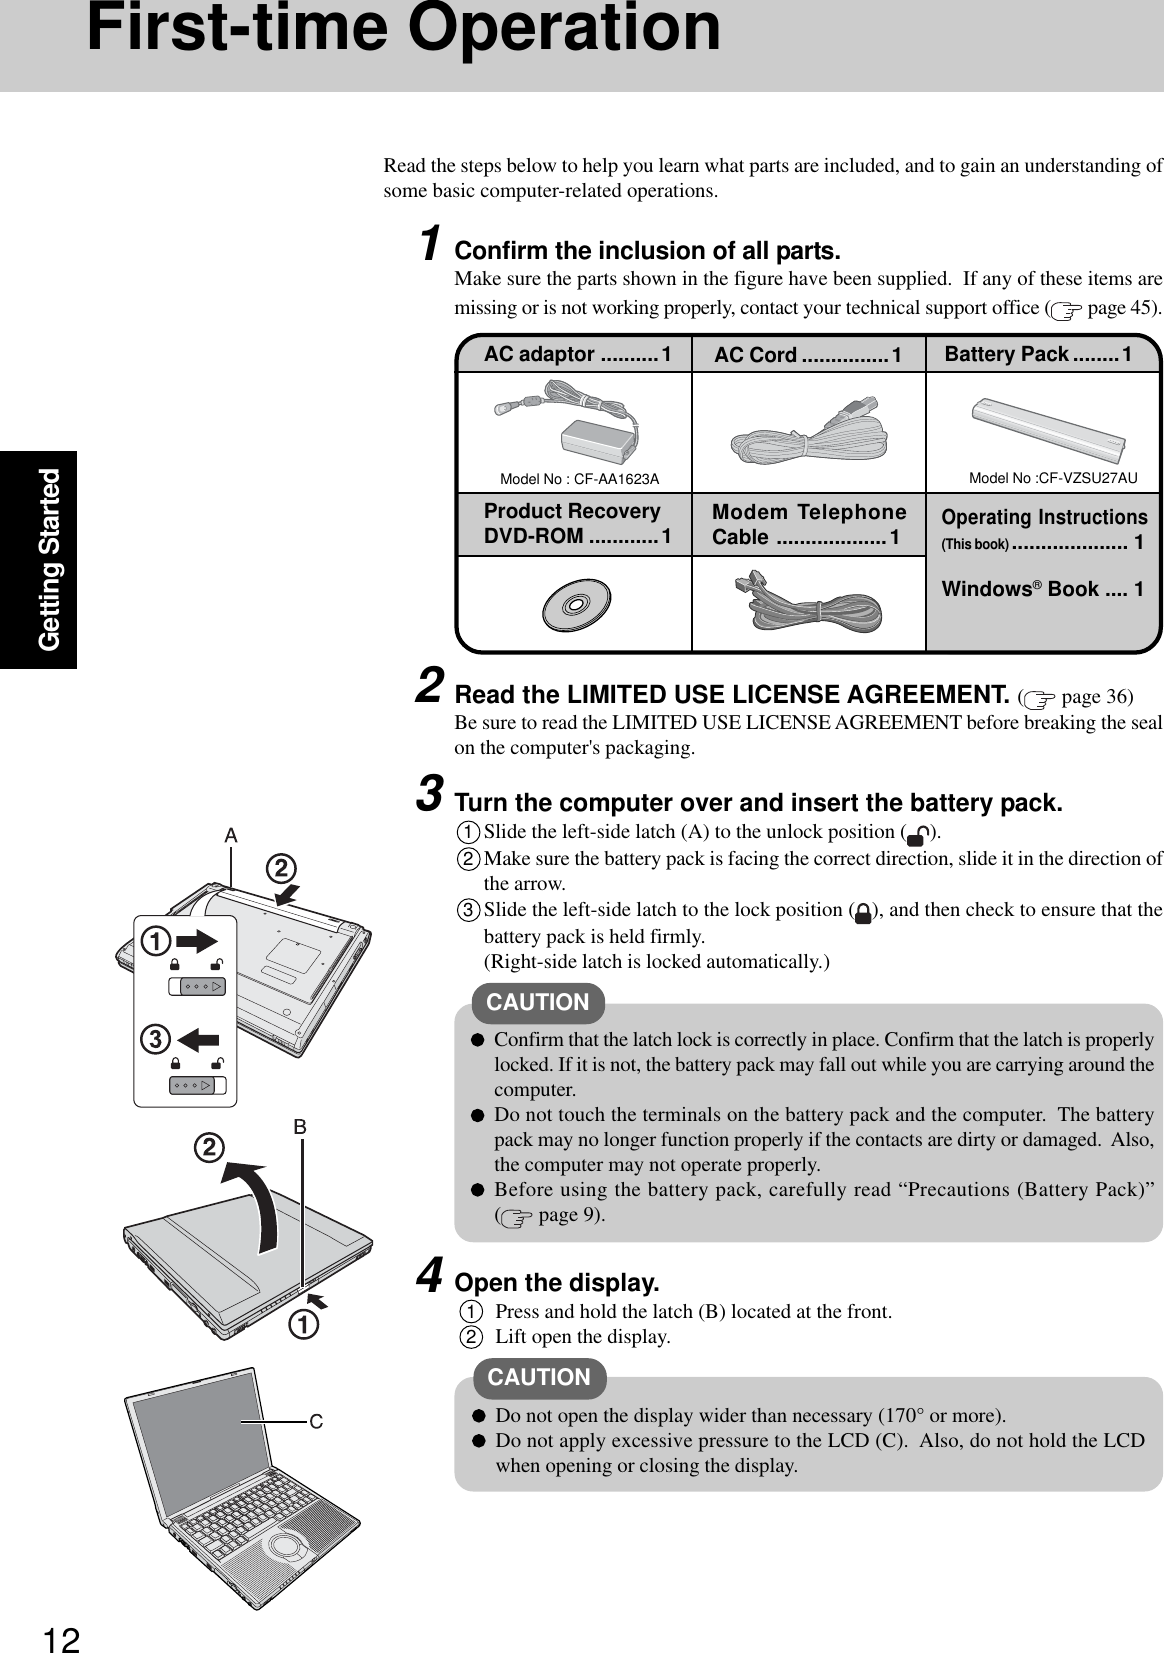 12Getting StartedFirst-time OperationRead the steps below to help you learn what parts are included, and to gain an understanding ofsome basic computer-related operations.1Confirm the inclusion of all parts.Make sure the parts shown in the figure have been supplied.  If any of these items aremissing or is not working properly, contact your technical support office (  page 45).Model No : CF-AA1623AAC adaptor ..........1Model No :CF-VZSU27AUAC Cord ...............1 Battery Pack ........1Product RecoveryDVD-ROM ............1 Modem TelephoneCable ...................1Windows® Book .... 1Operating Instructions(This book).................... 13Turn the computer over and insert the battery pack.1Slide the left-side latch (A) to the unlock position ( ).2Make sure the battery pack is facing the correct direction, slide it in the direction ofthe arrow.3Slide the left-side latch to the lock position ( ), and then check to ensure that thebattery pack is held firmly.(Right-side latch is locked automatically.)CAUTIONConfirm that the latch lock is correctly in place. Confirm that the latch is properlylocked. If it is not, the battery pack may fall out while you are carrying around thecomputer.Do not touch the terminals on the battery pack and the computer.  The batterypack may no longer function properly if the contacts are dirty or damaged.  Also,the computer may not operate properly.Before using the battery pack, carefully read “Precautions (Battery Pack)”( page 9).2Read the LIMITED USE LICENSE AGREEMENT. ( page 36)Be sure to read the LIMITED USE LICENSE AGREEMENT before breaking the sealon the computer&apos;s packaging.4Open the display.1Press and hold the latch (B) located at the front.2Lift open the display.CAUTIONDo not open the display wider than necessary (170° or more).Do not apply excessive pressure to the LCD (C).  Also, do not hold the LCDwhen opening or closing the display.